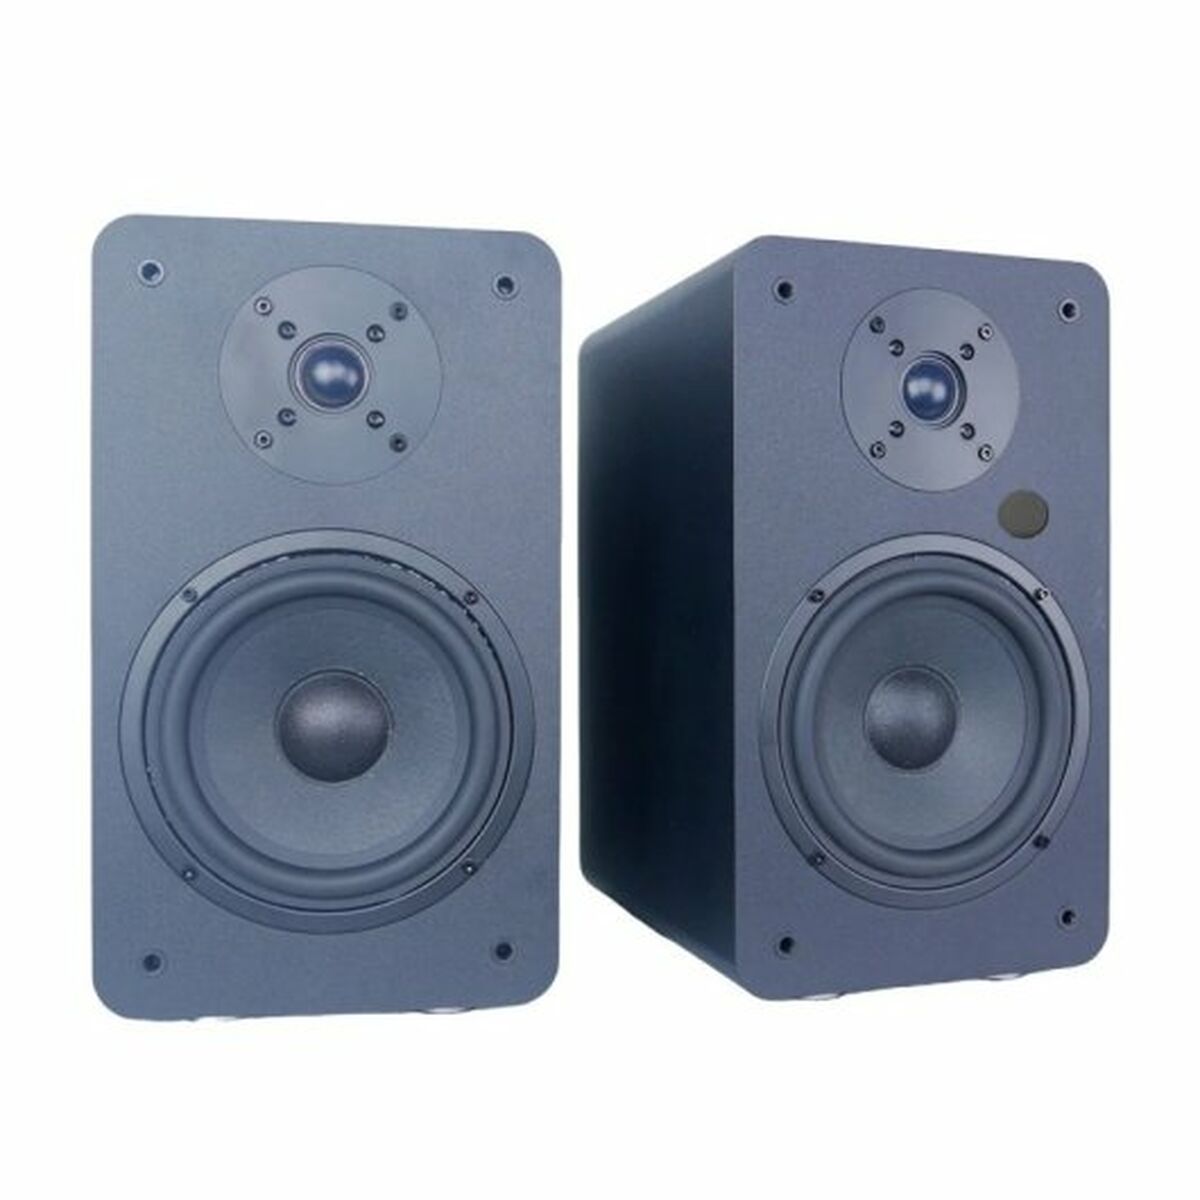 Speakers Vulkkano A6 ARC Black 120 W, Vulkkano, Computing, Accessories, speakers-vulkkano-a6-arc-black-120-w, Brand_Vulkkano, category-reference-2609, category-reference-2642, category-reference-2945, category-reference-t-19685, category-reference-t-19908, category-reference-t-21340, category-reference-t-25571, computers / peripherals, Condition_NEW, entertainment, music, office, Price_200 - 300, Teleworking, RiotNook